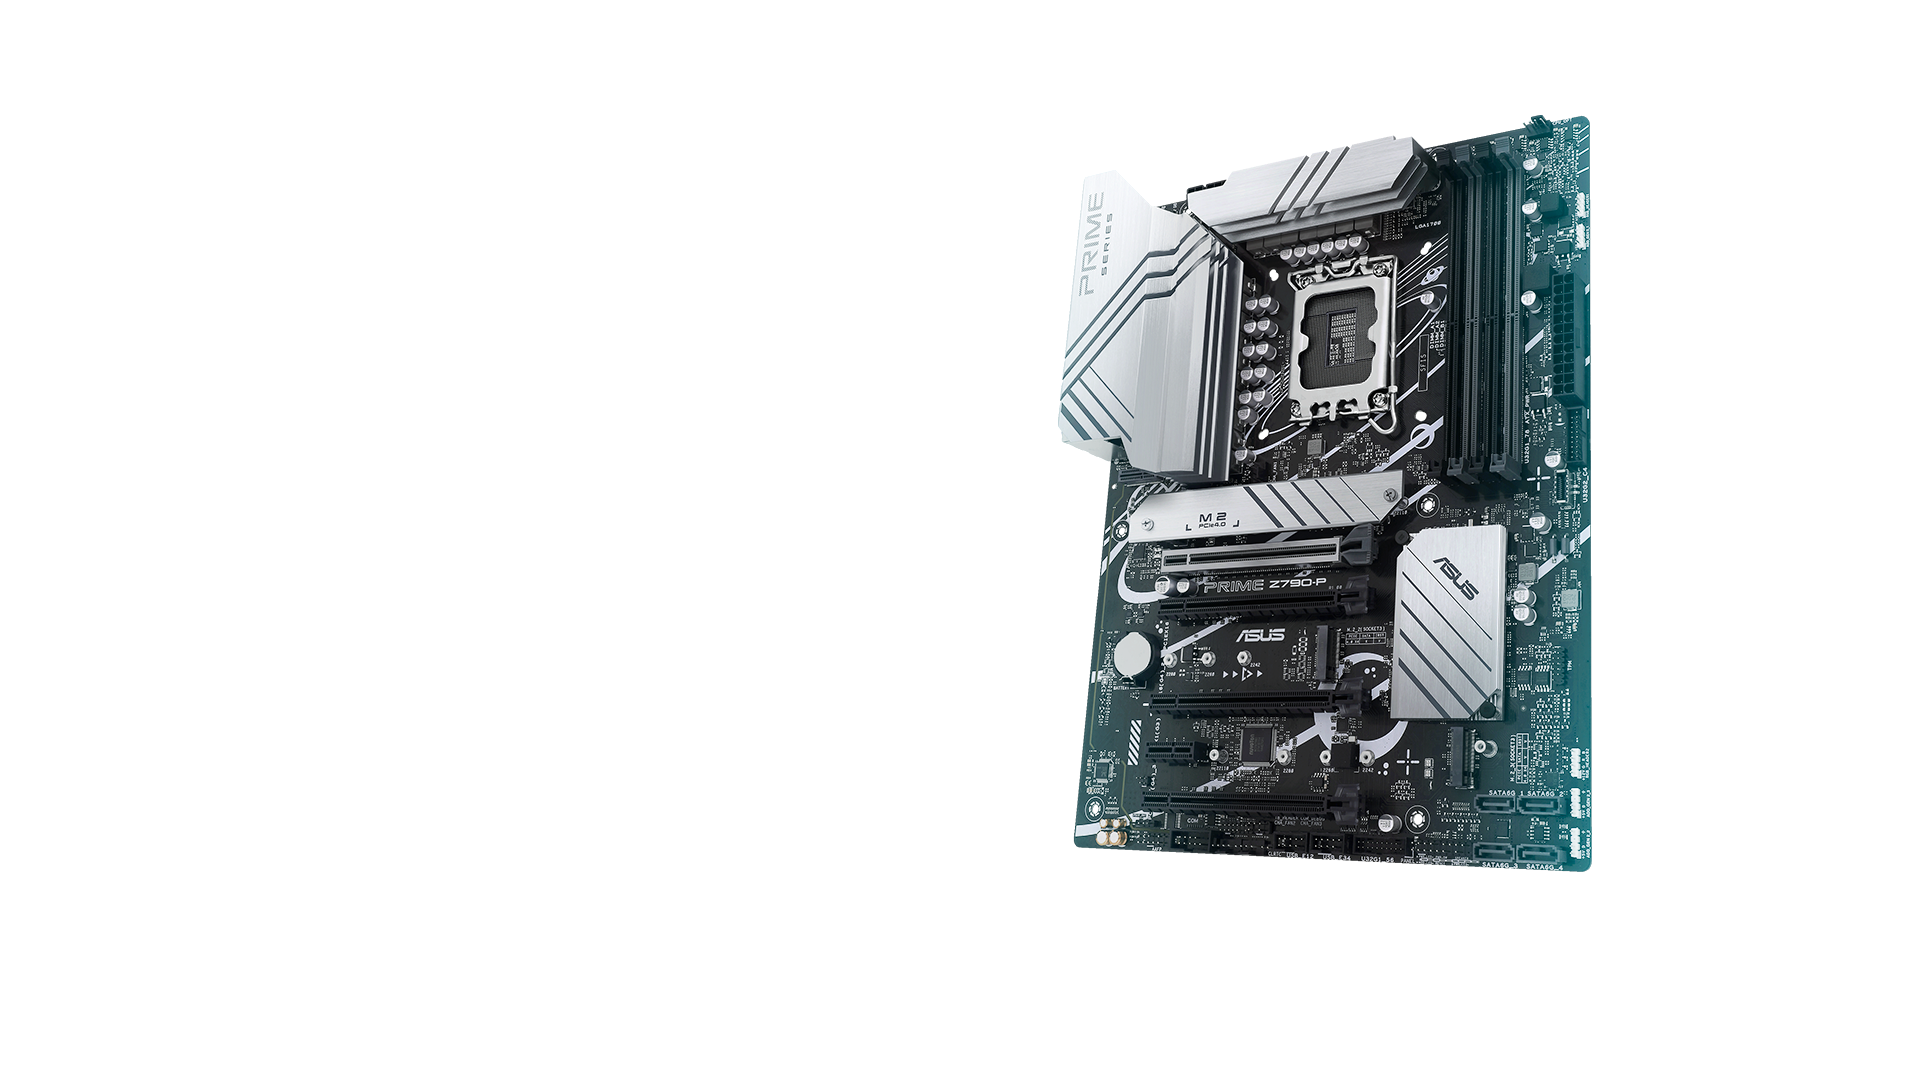 PRIME Z790-P provides users and PC DIY builders a range of performance tuning options via intuitive software and firmware features.